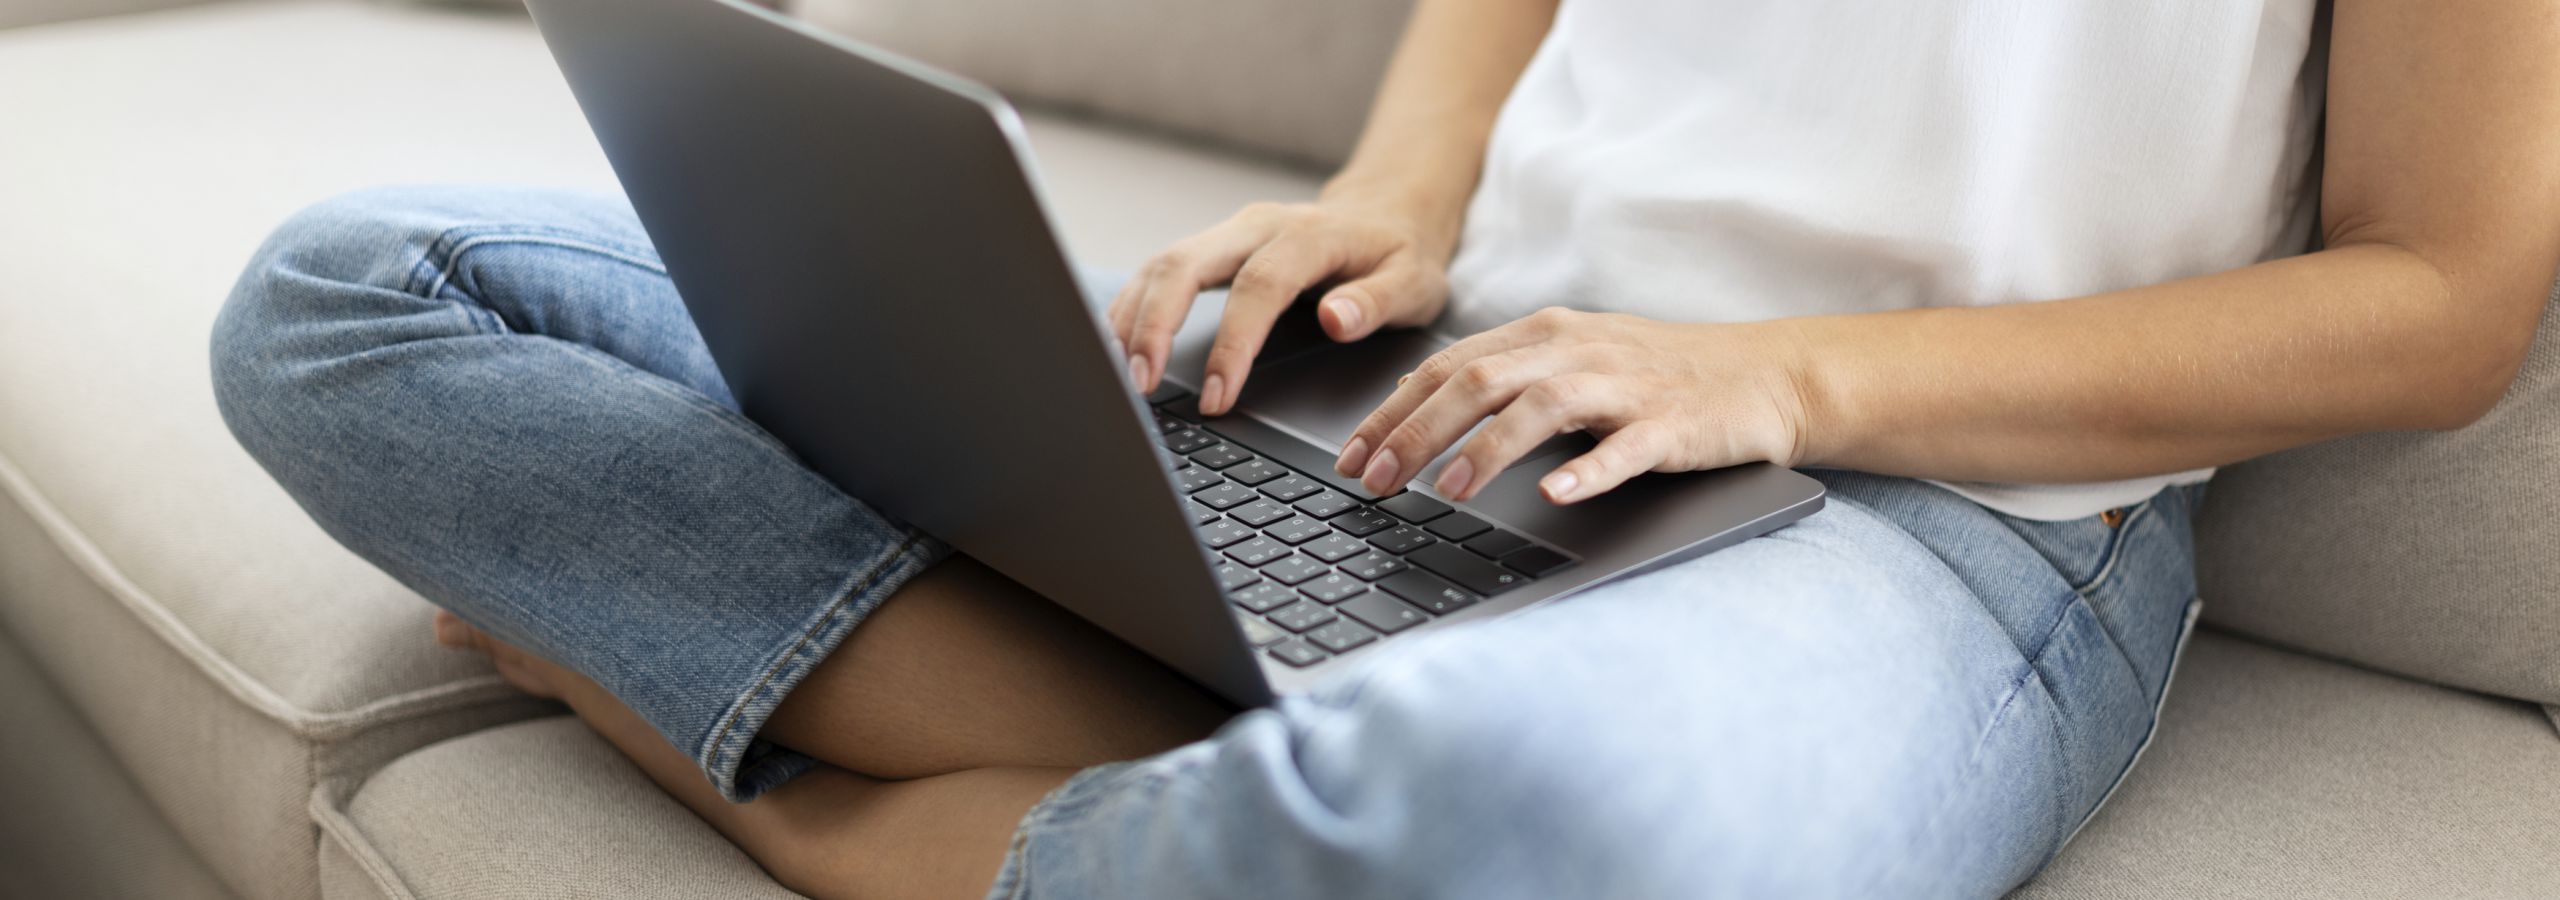 woman typing on computer on couch